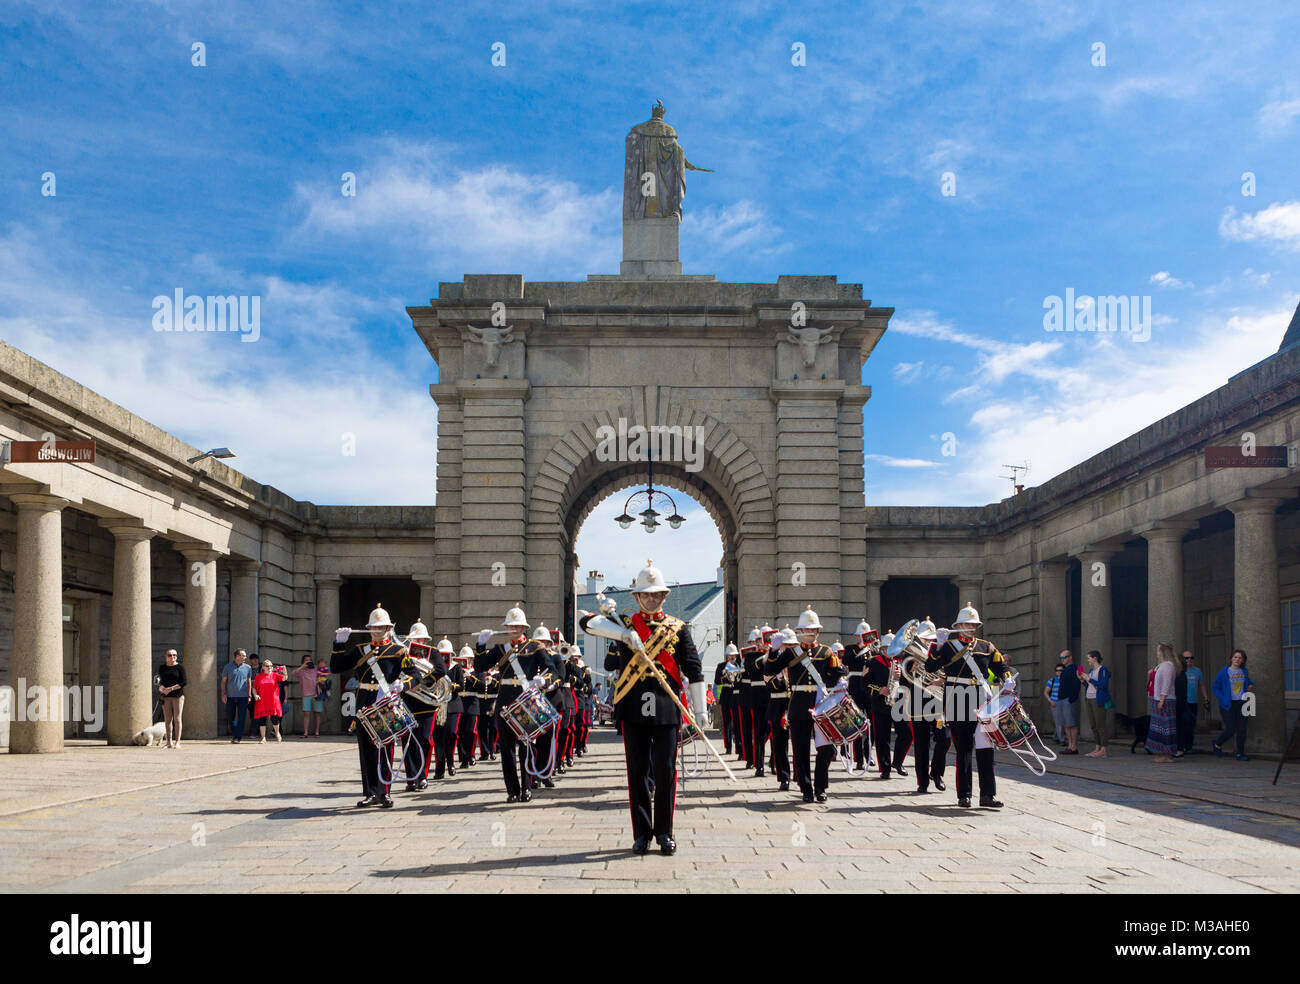 The Band of HM Royal Marines march through Plymouth's Royal William Yard Archway on a bright sunny day. Stock Photo